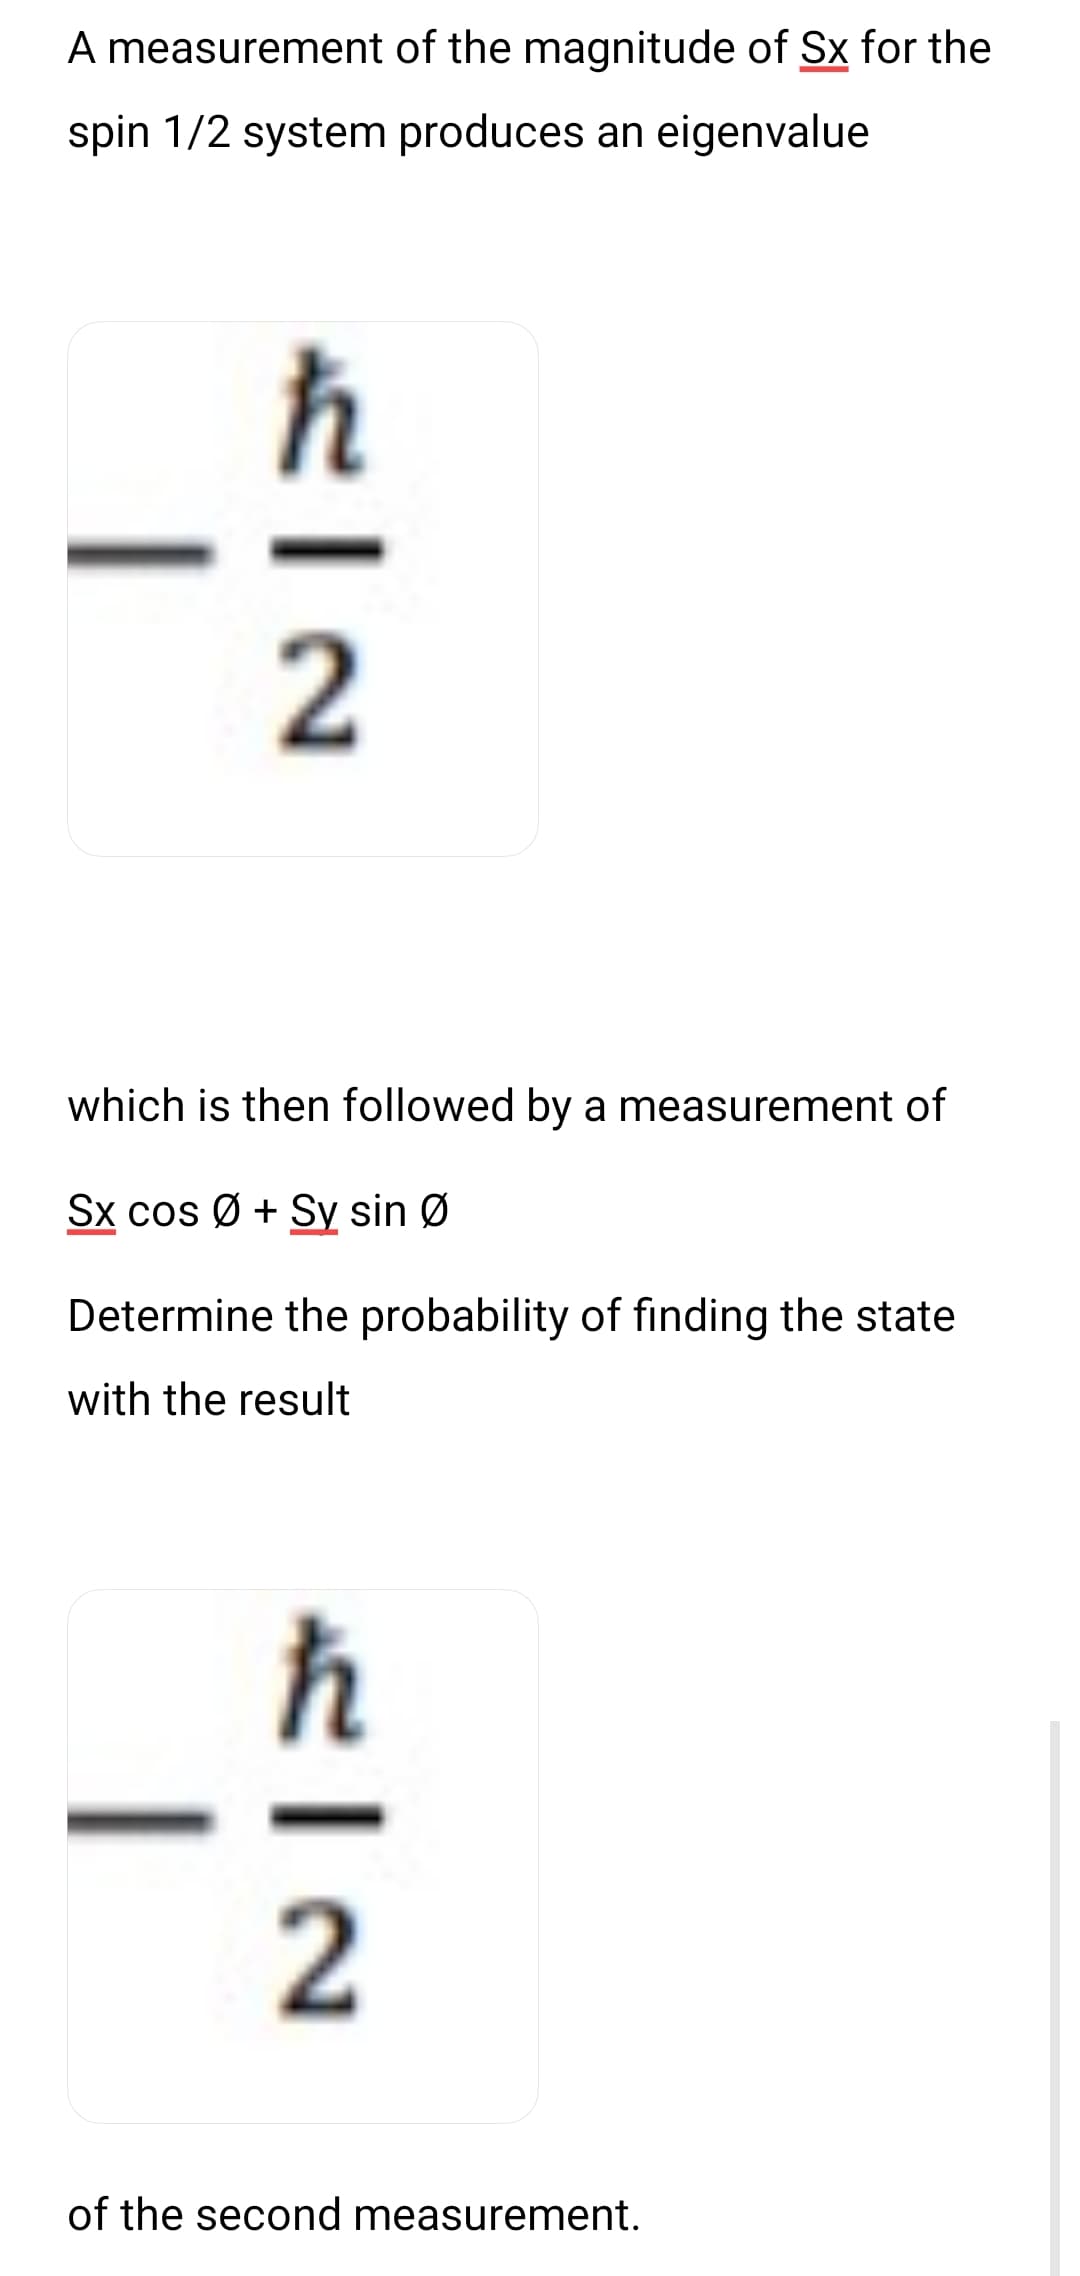 A measurement of the magnitude of Sx for the
spin 1/2 system produces an eigenvalue
I
FIN
2
which is then followed by a measurement of
Sx cos Ø+ Sy sin Ø
Determine the probability of finding the state
with the result
EIN
2
of the second measurement.